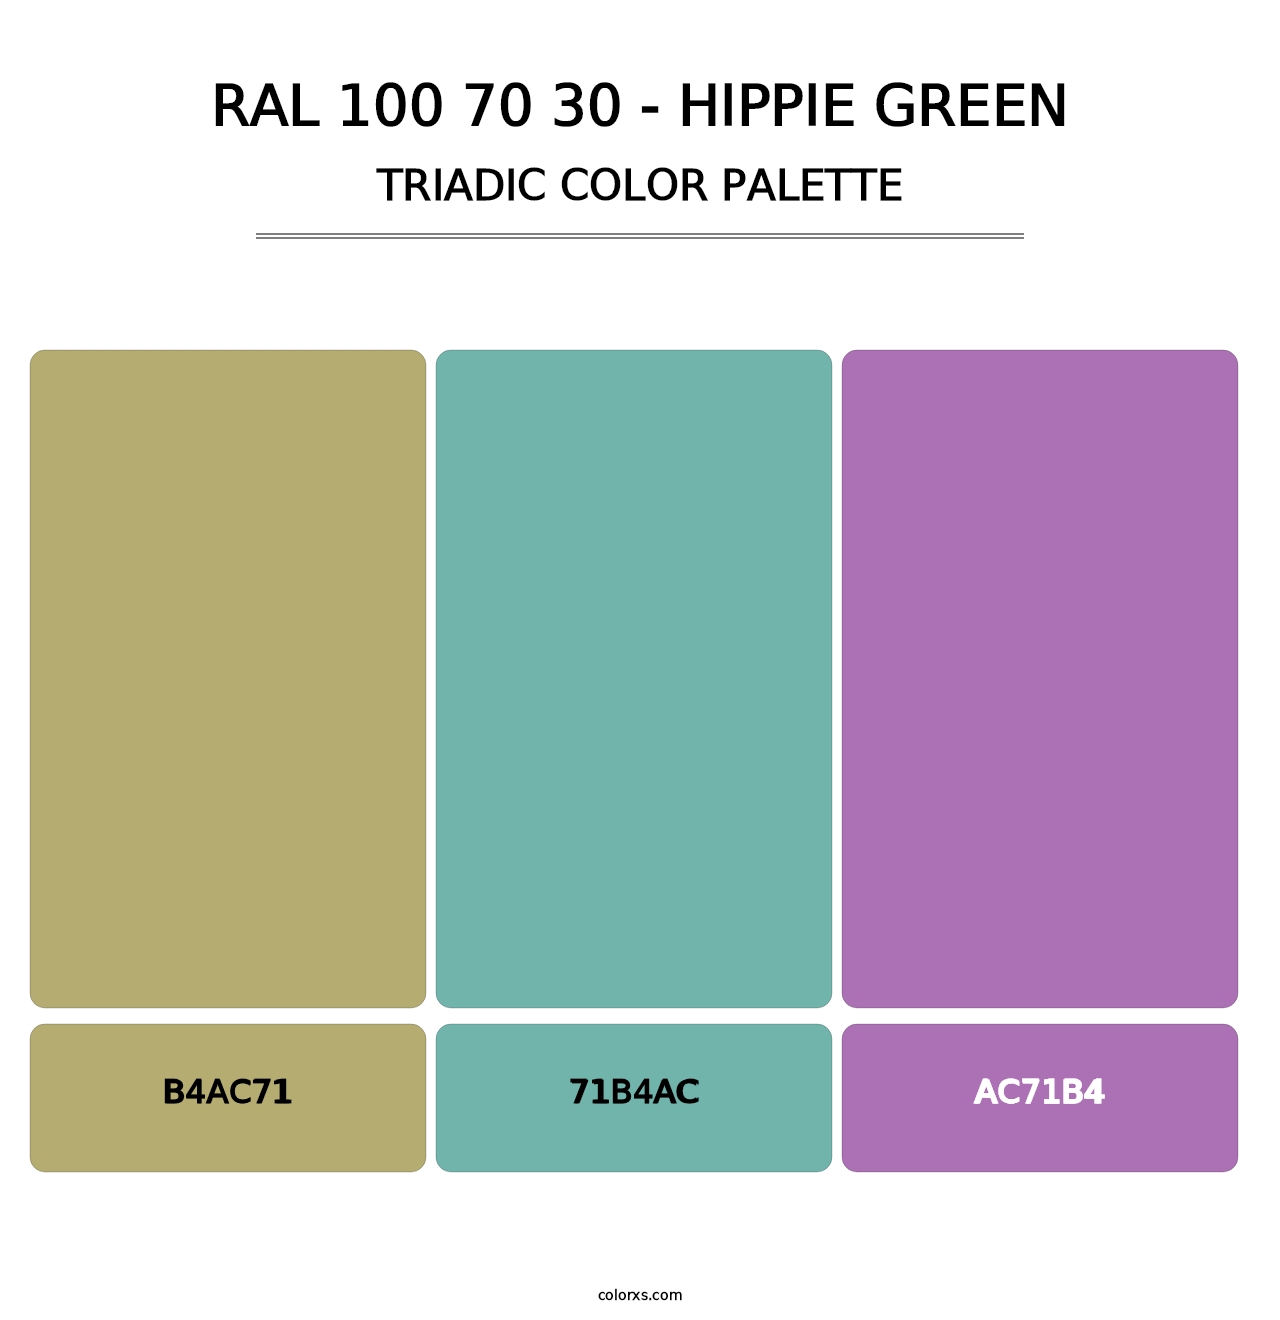 RAL 100 70 30 - Hippie Green - Triadic Color Palette